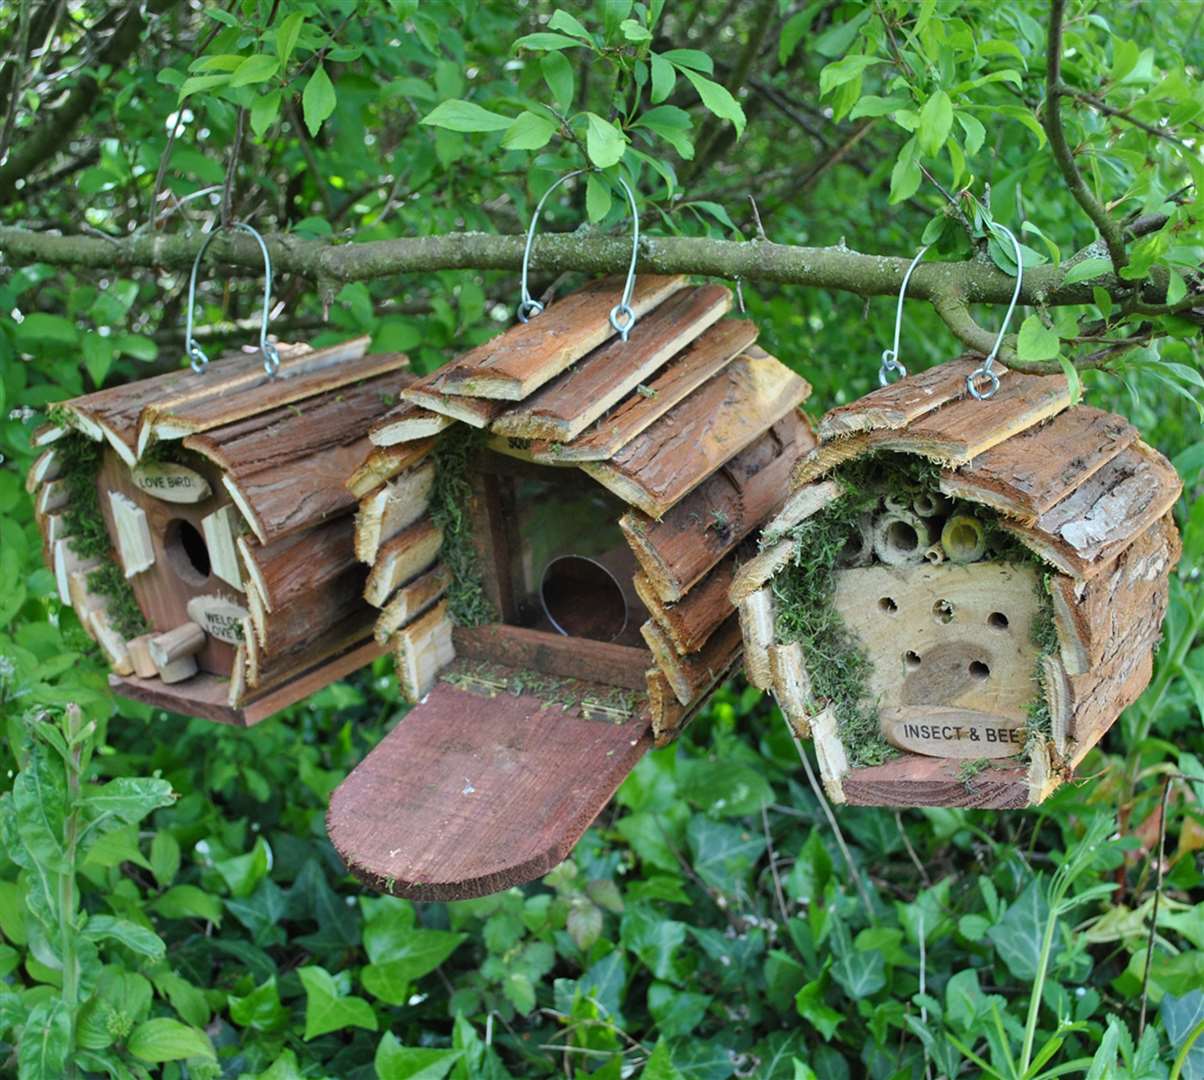 A wildlife set for birds, bees and squirrels. Picture: CJ Wildlife/PA